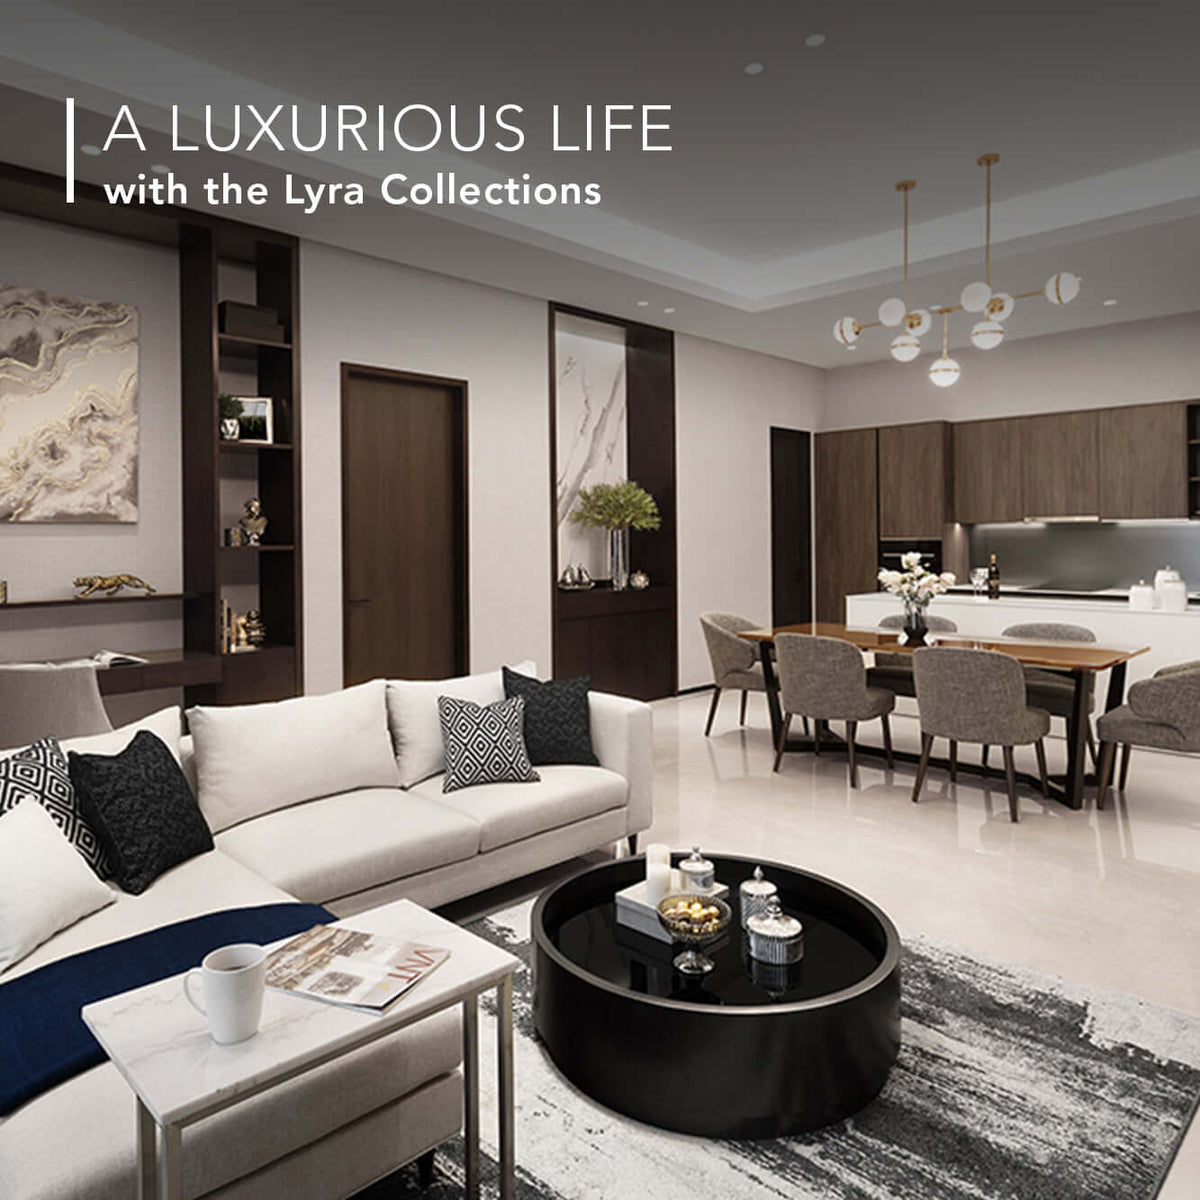 A Luxurious Life with the Lyra Collection